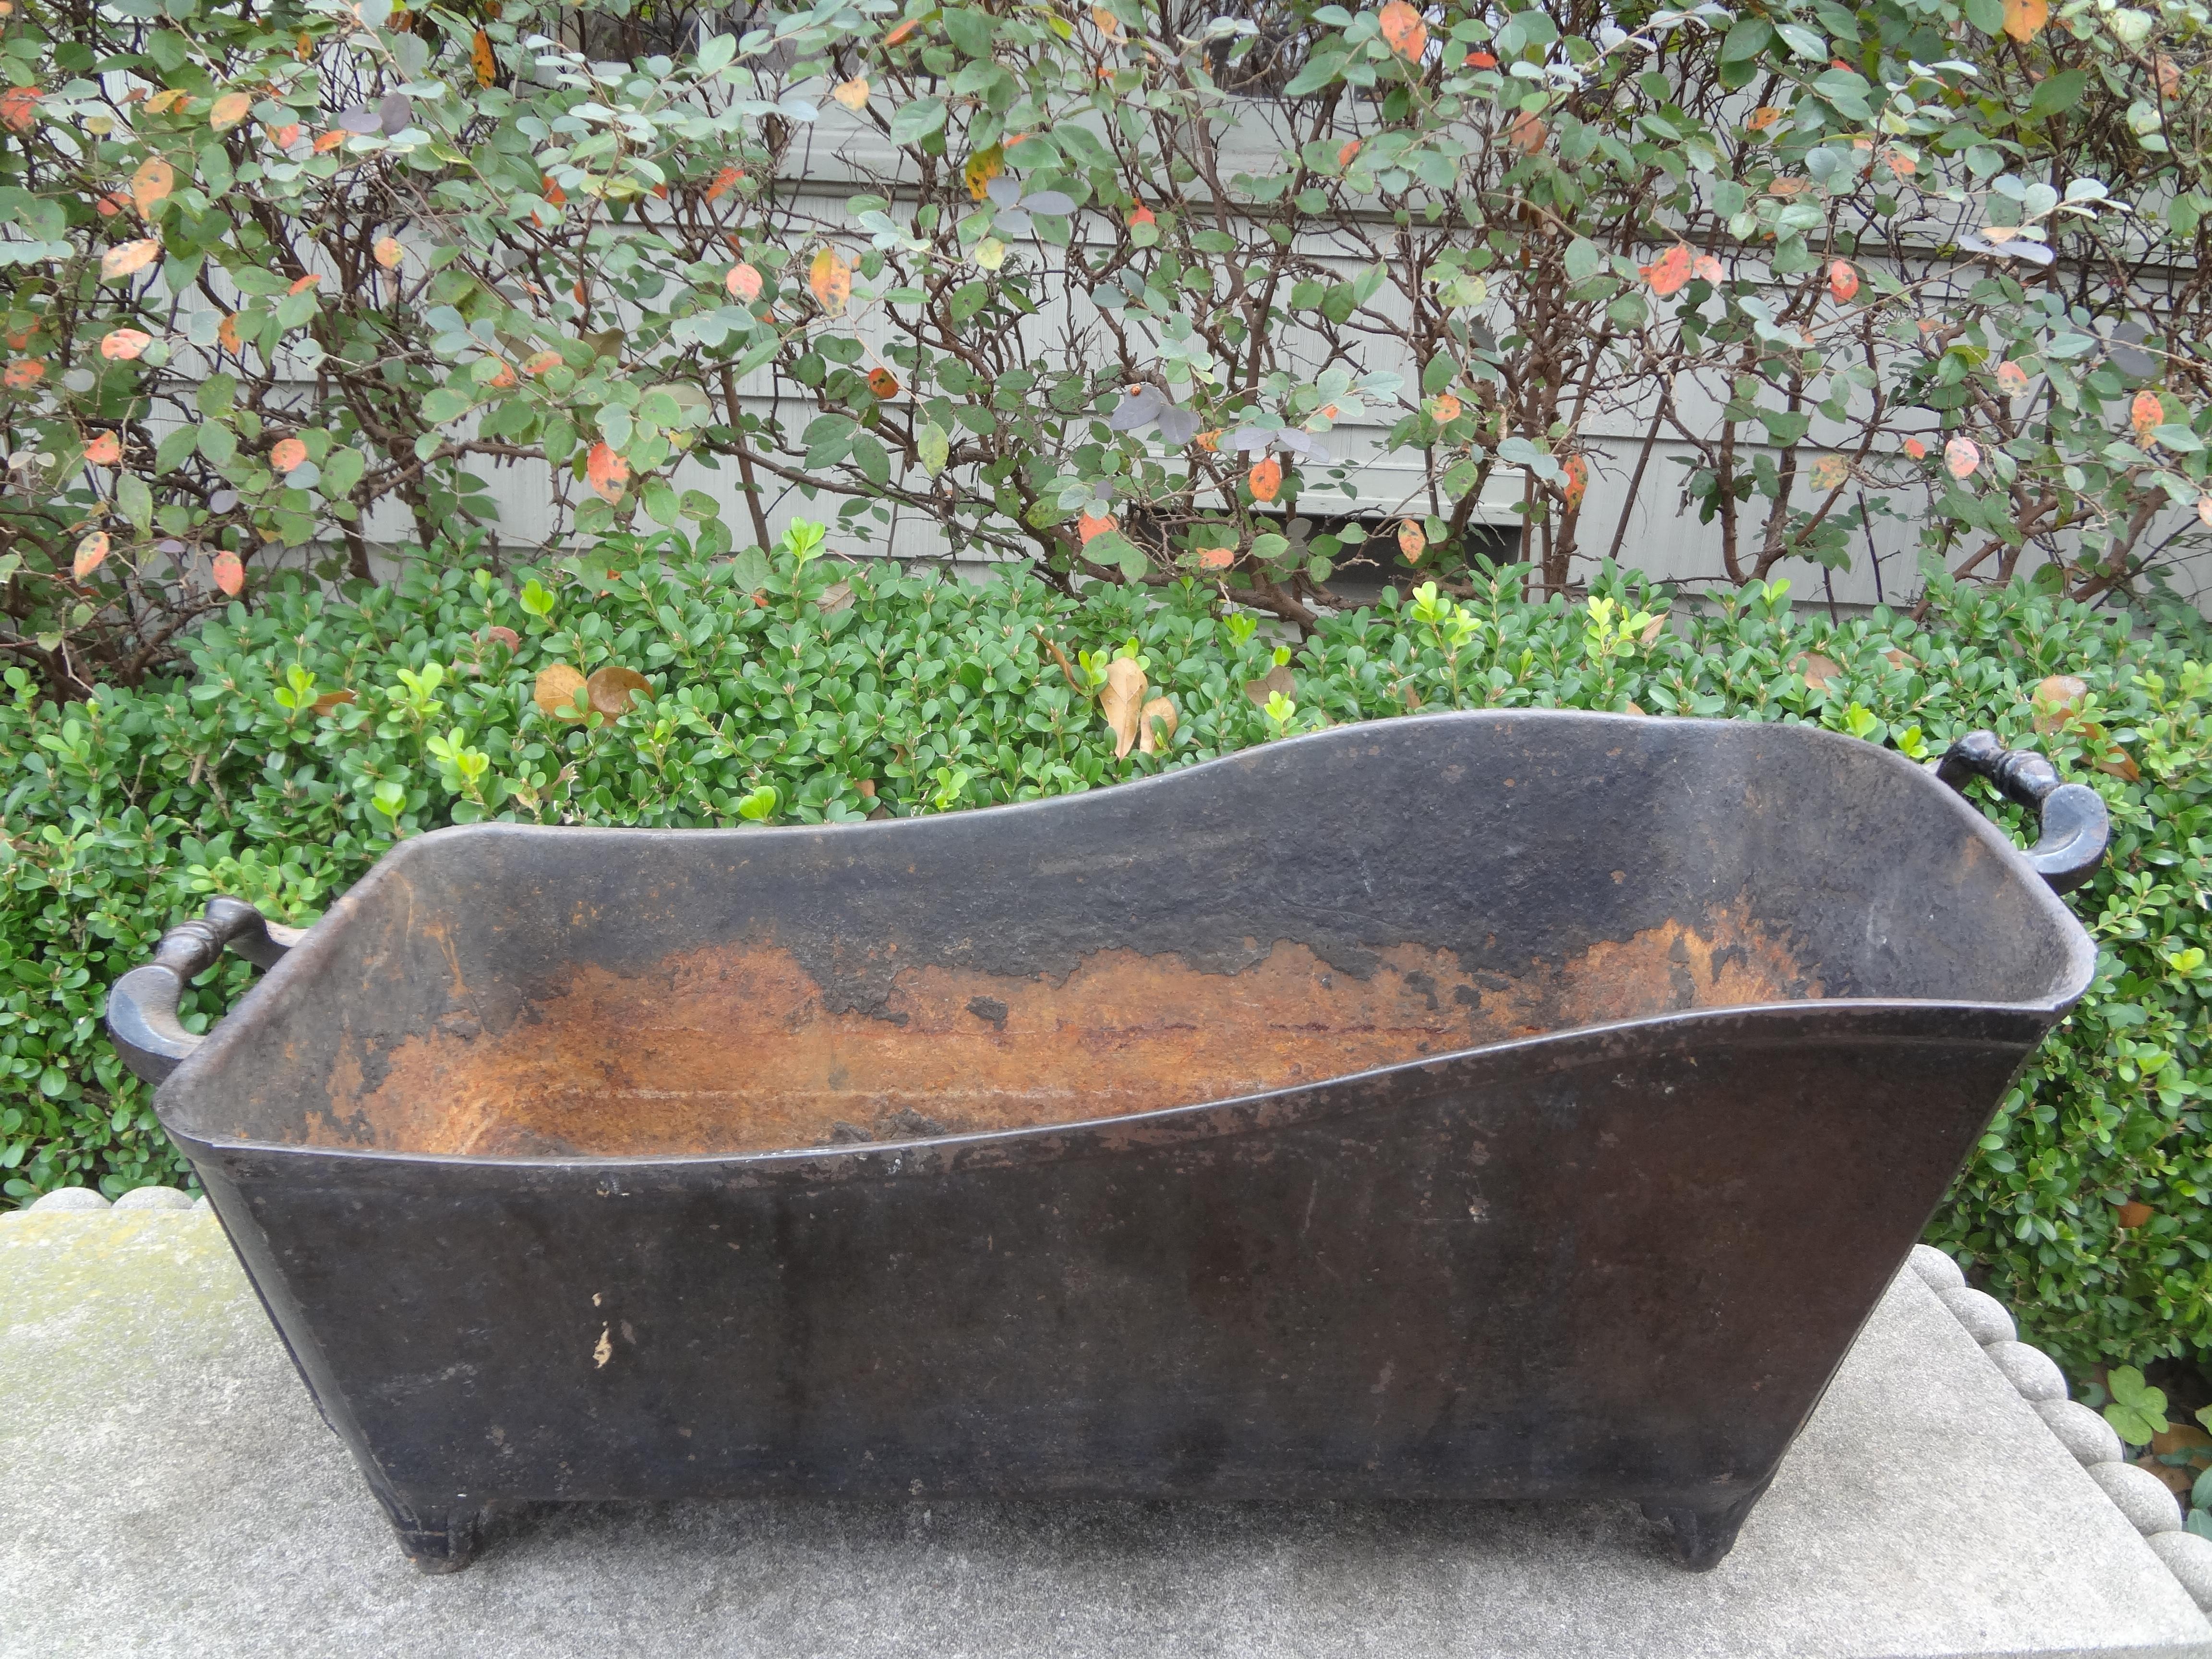 19th Century French cast iron jardiniere or planter. This stunning large scale Antique French iron planter or cachepot will accommodate a large orchid plant, blooming plants, green plants or a floral arrangement. Perfect dining table or coffee table